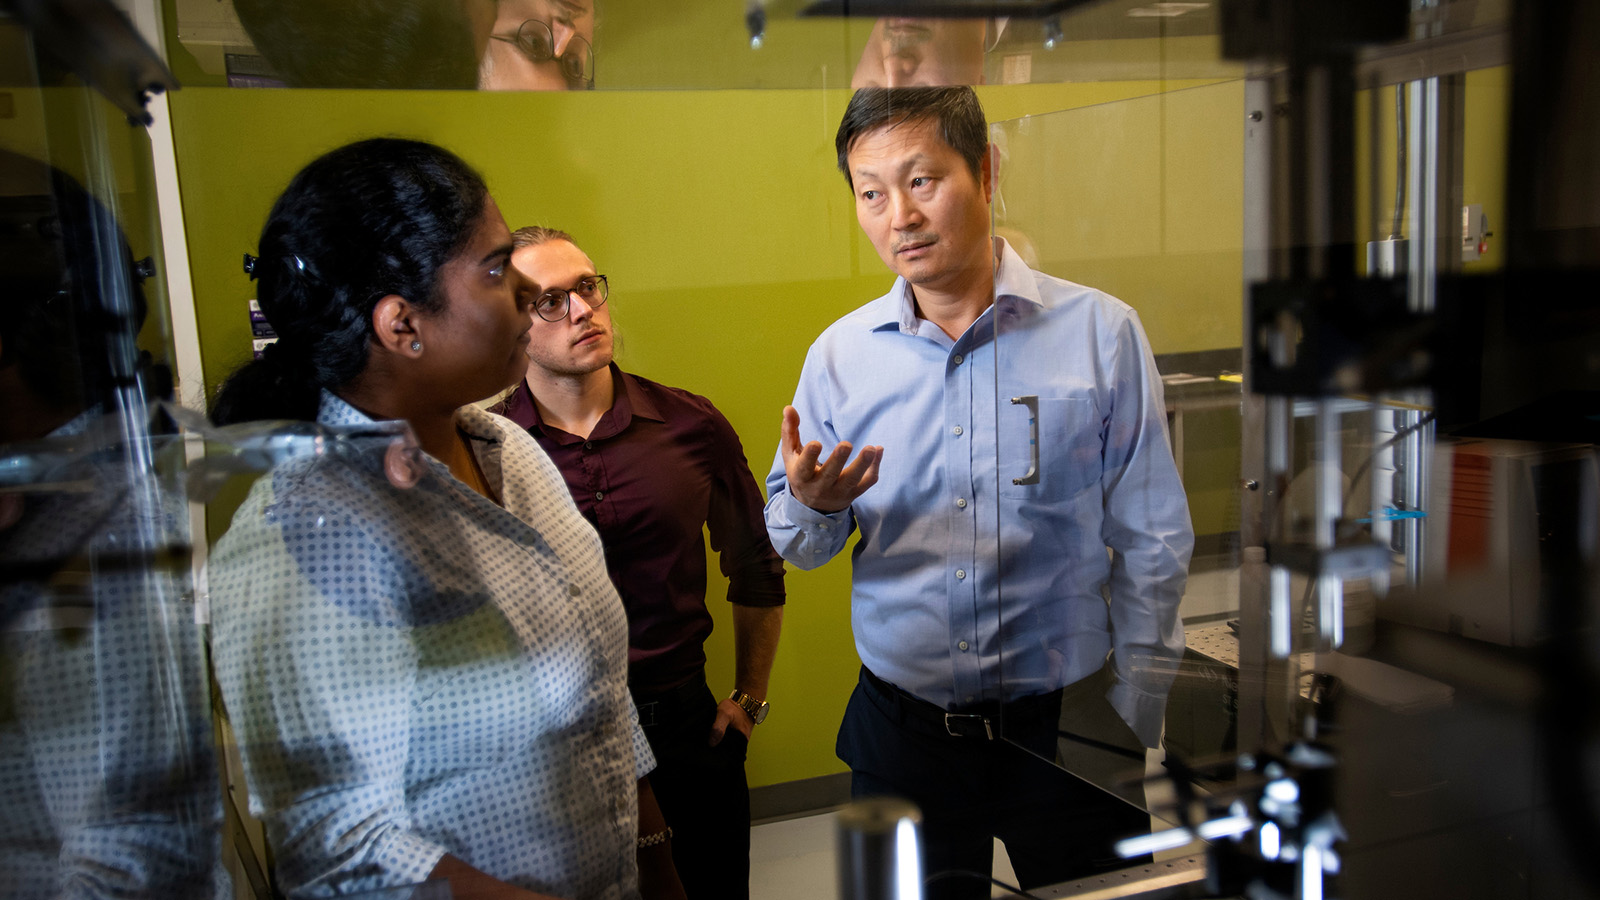 Faculty member Tae-Youl Choi works with two students in the lab.